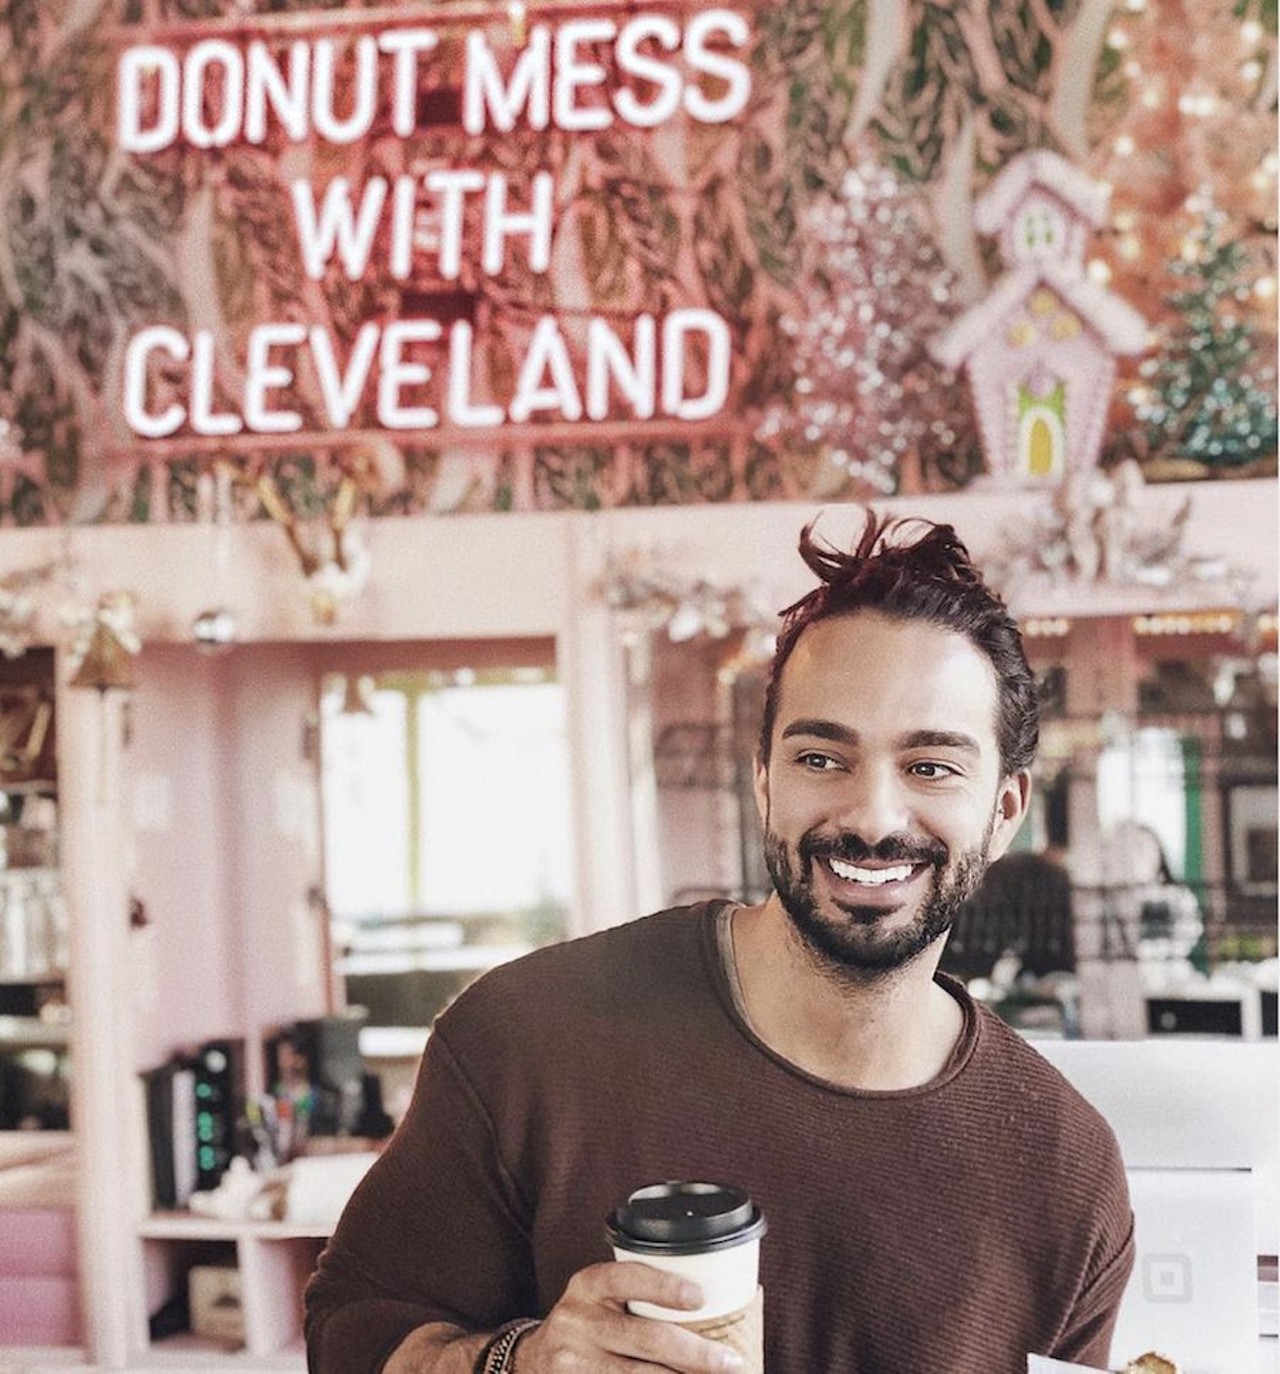  Brewnuts &#145;Donut Mess With Cleveland Sign&#146;
6501 Detroit Ave., Cleveland  
Yeah, Brewnuts makes some awesome, unique donuts. But their neon sign that reads &#145;Donut Mess With Cleveland&#146; is what&#146;ll get you all the likes.
Photo via @dannyledinsky/Instagram